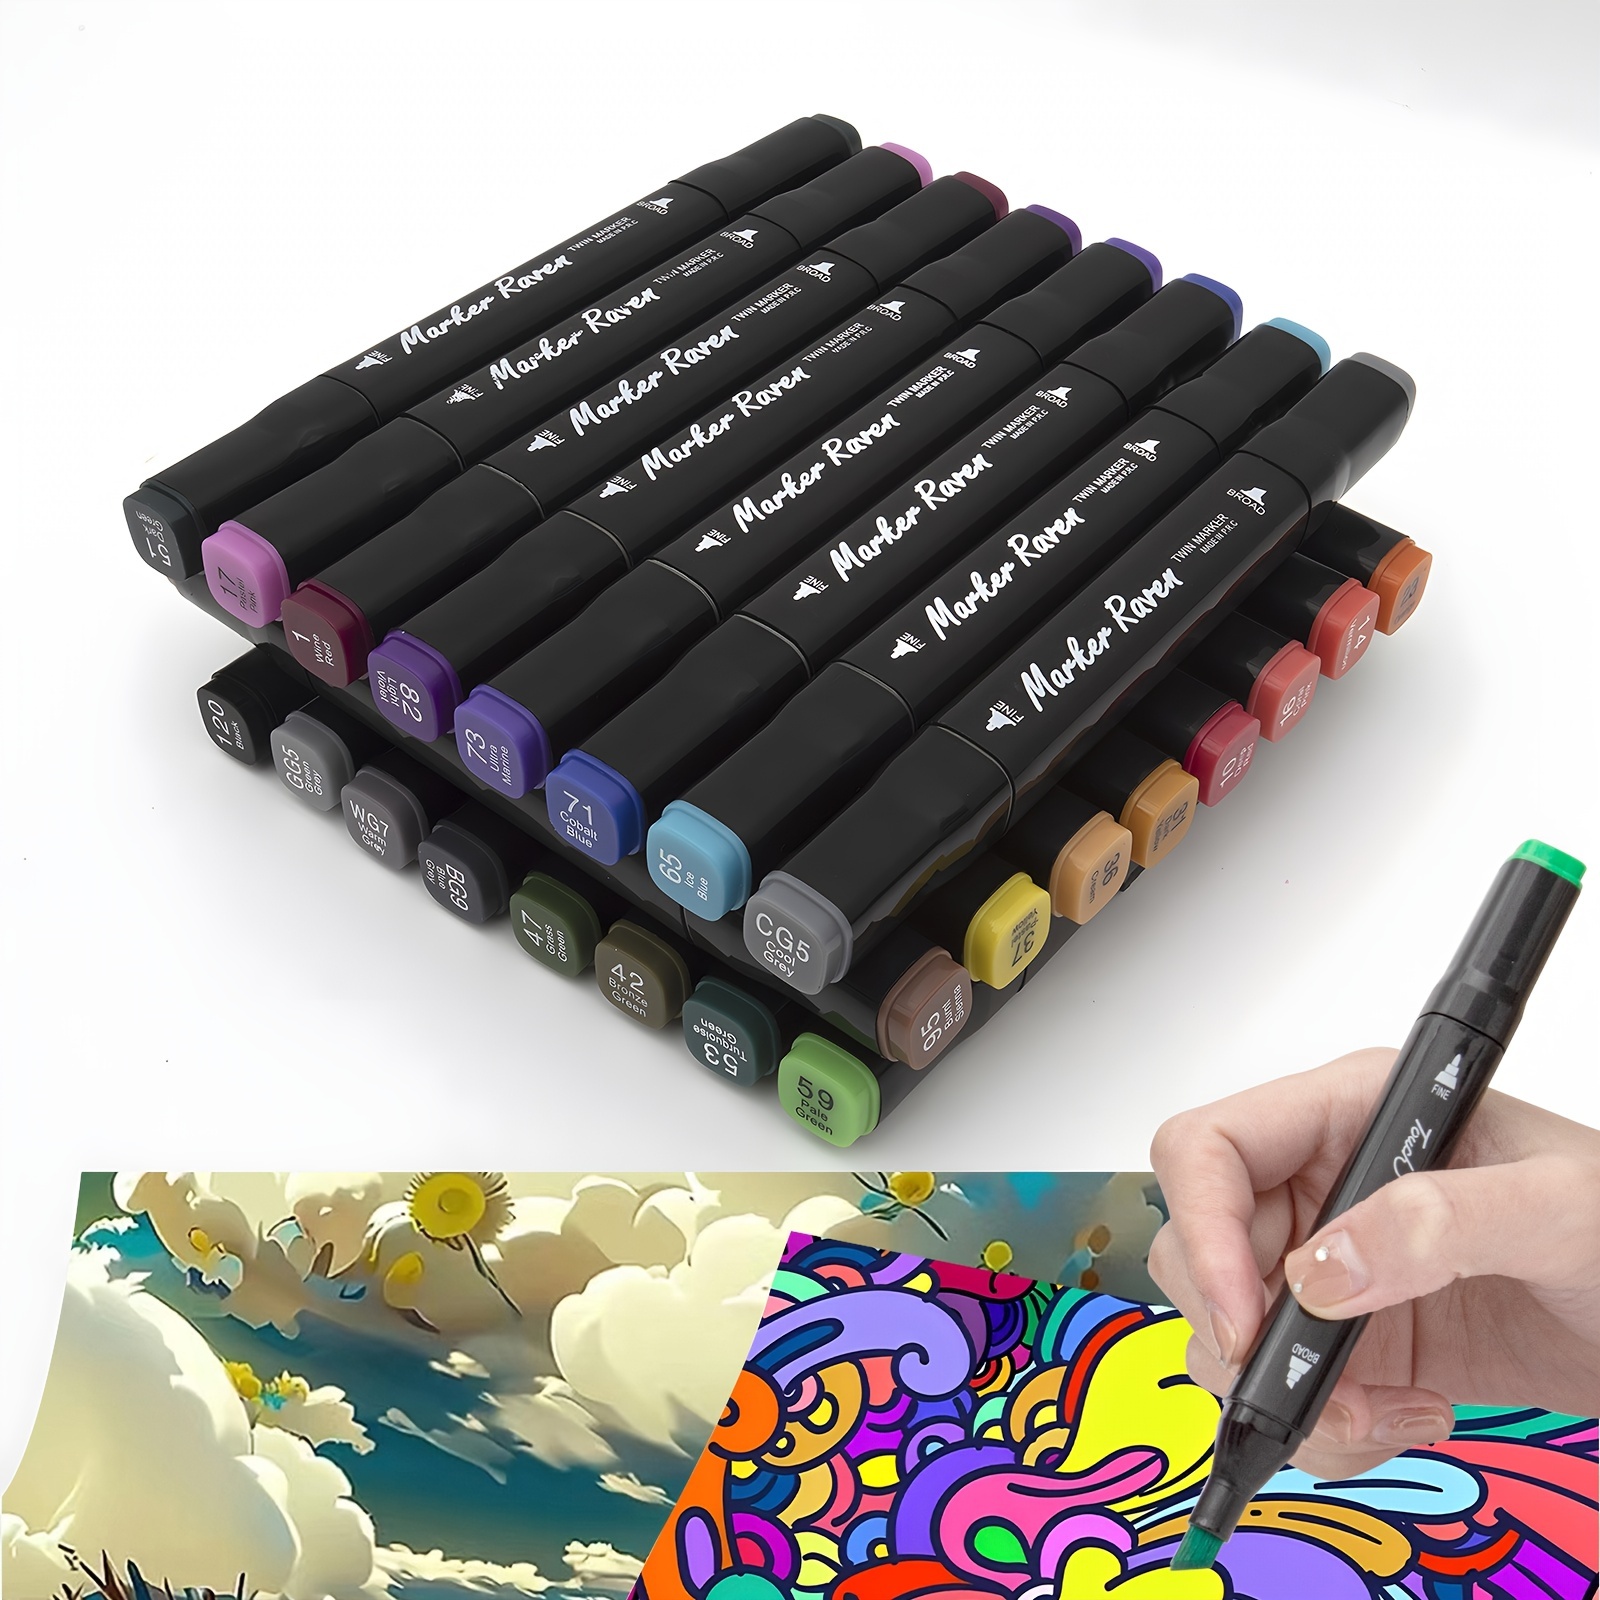 How long do alcohol markers last? : r/Coloring